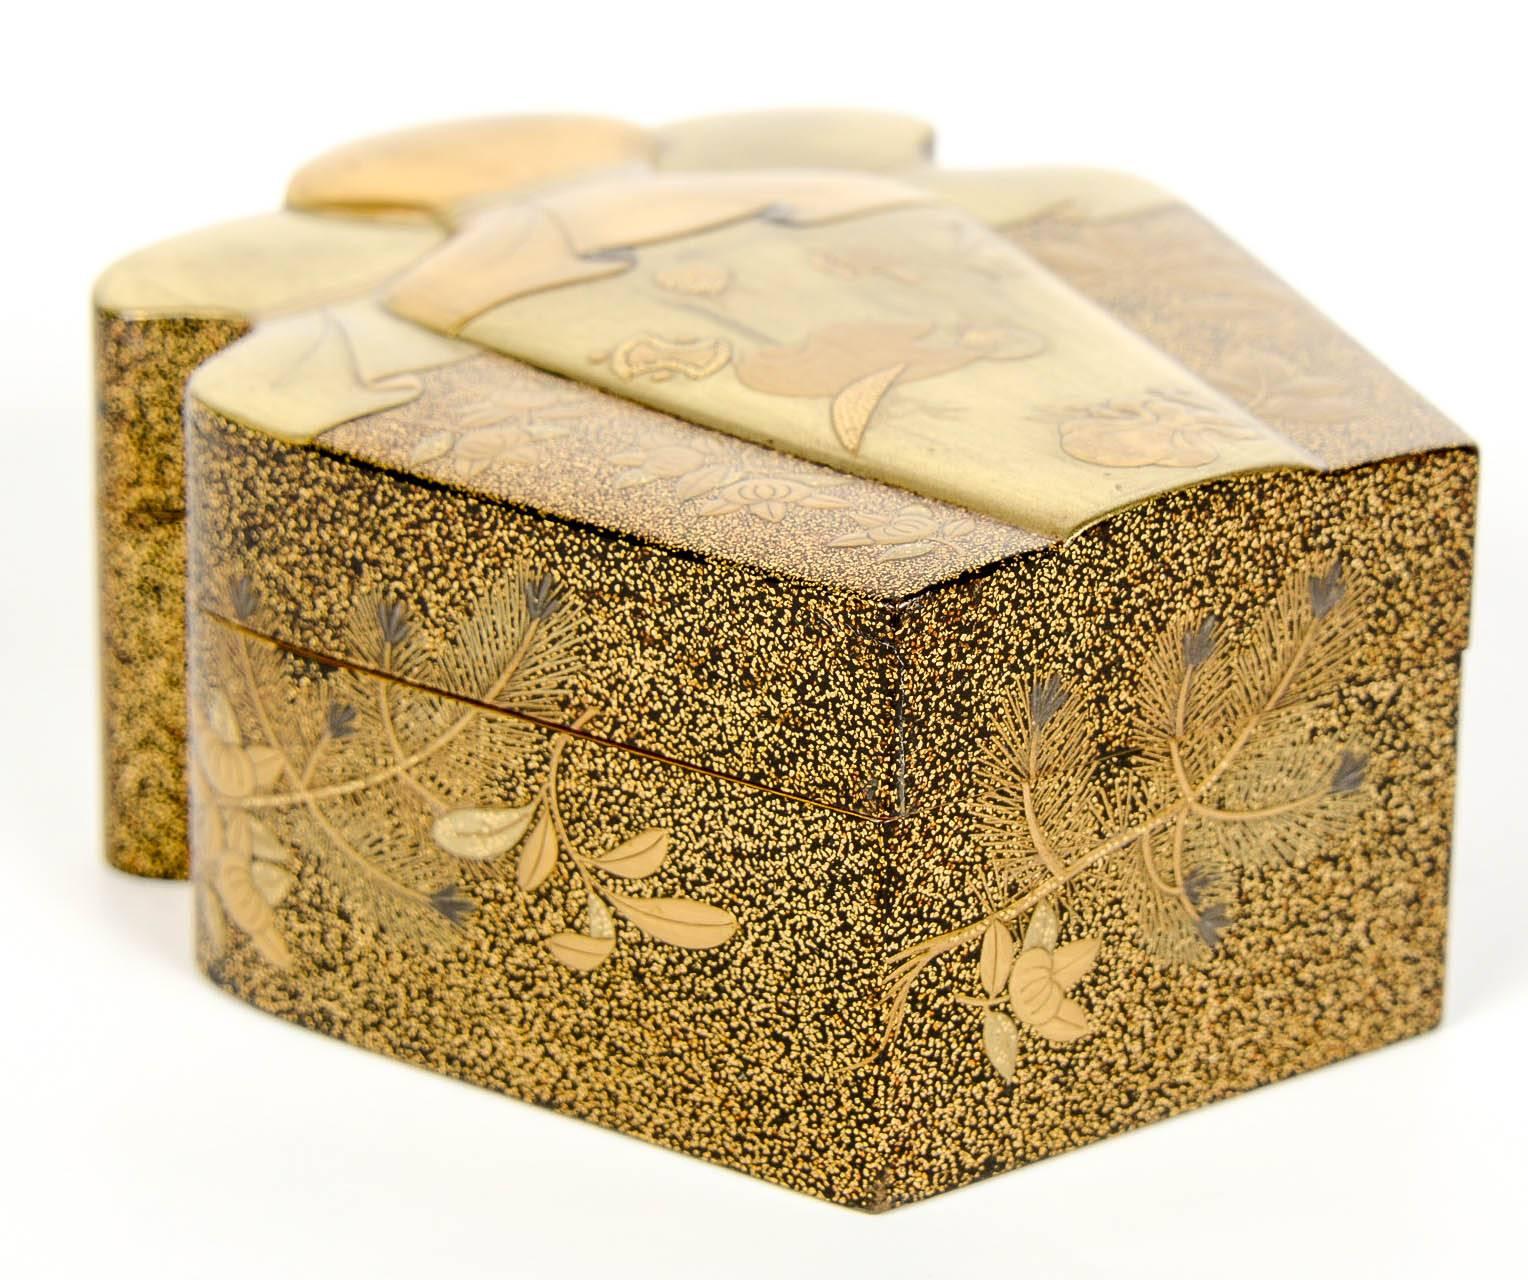 Small gold lacquer Kobako depicting a purse tied by a cord. It shows a ritual objects decor in its central part, flowering branches and pine trees on the sides of the lid.
The sides are decorated with flowering branches and pine branches on a